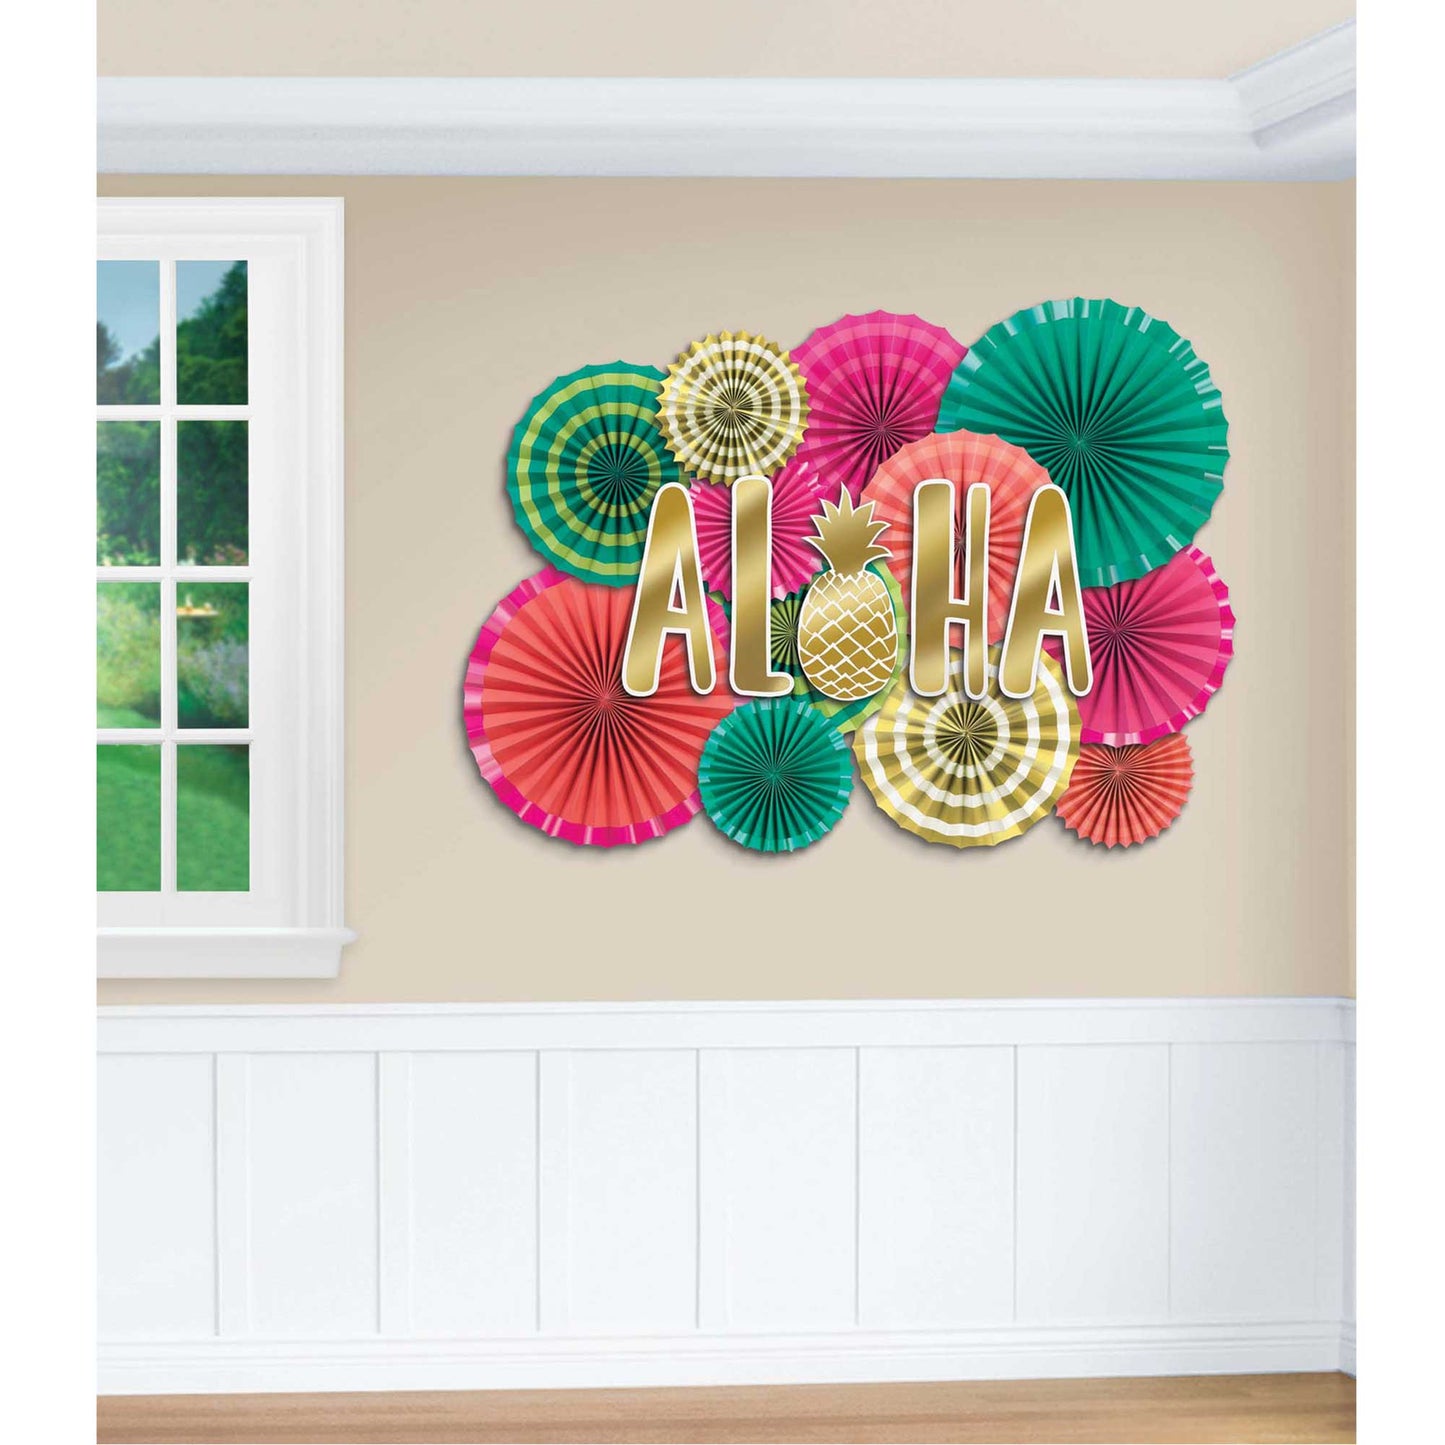 Aloha Deluxe Fans & Cutouts Decorating Kit